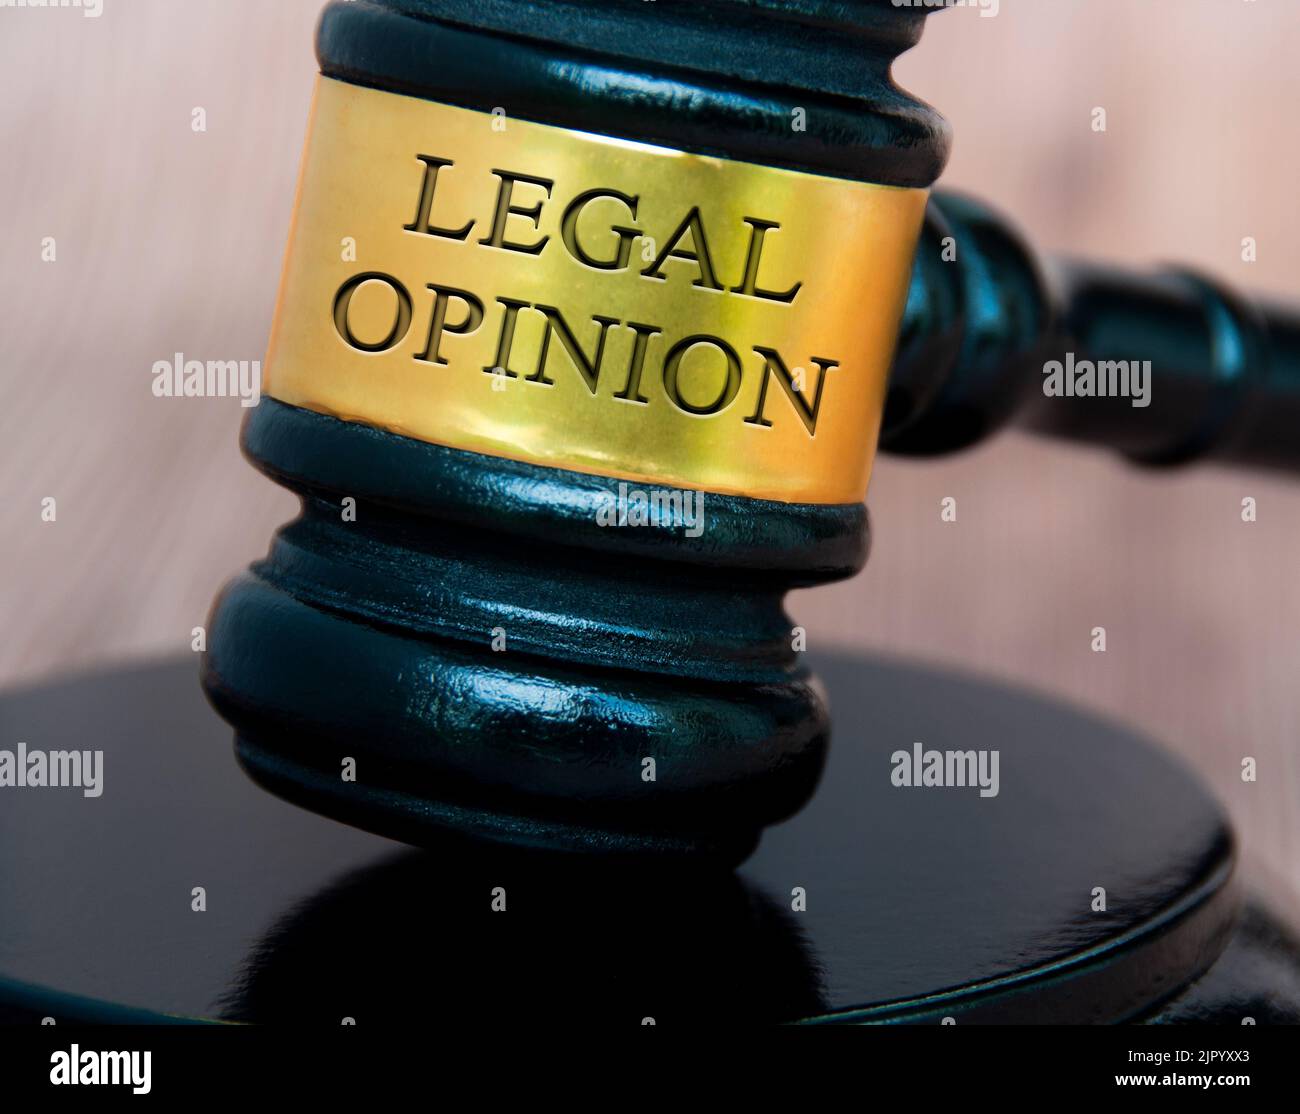 Legal opinion text engraved on lawyer gavel with blurred wooden background. Legal and law concept. Stock Photo